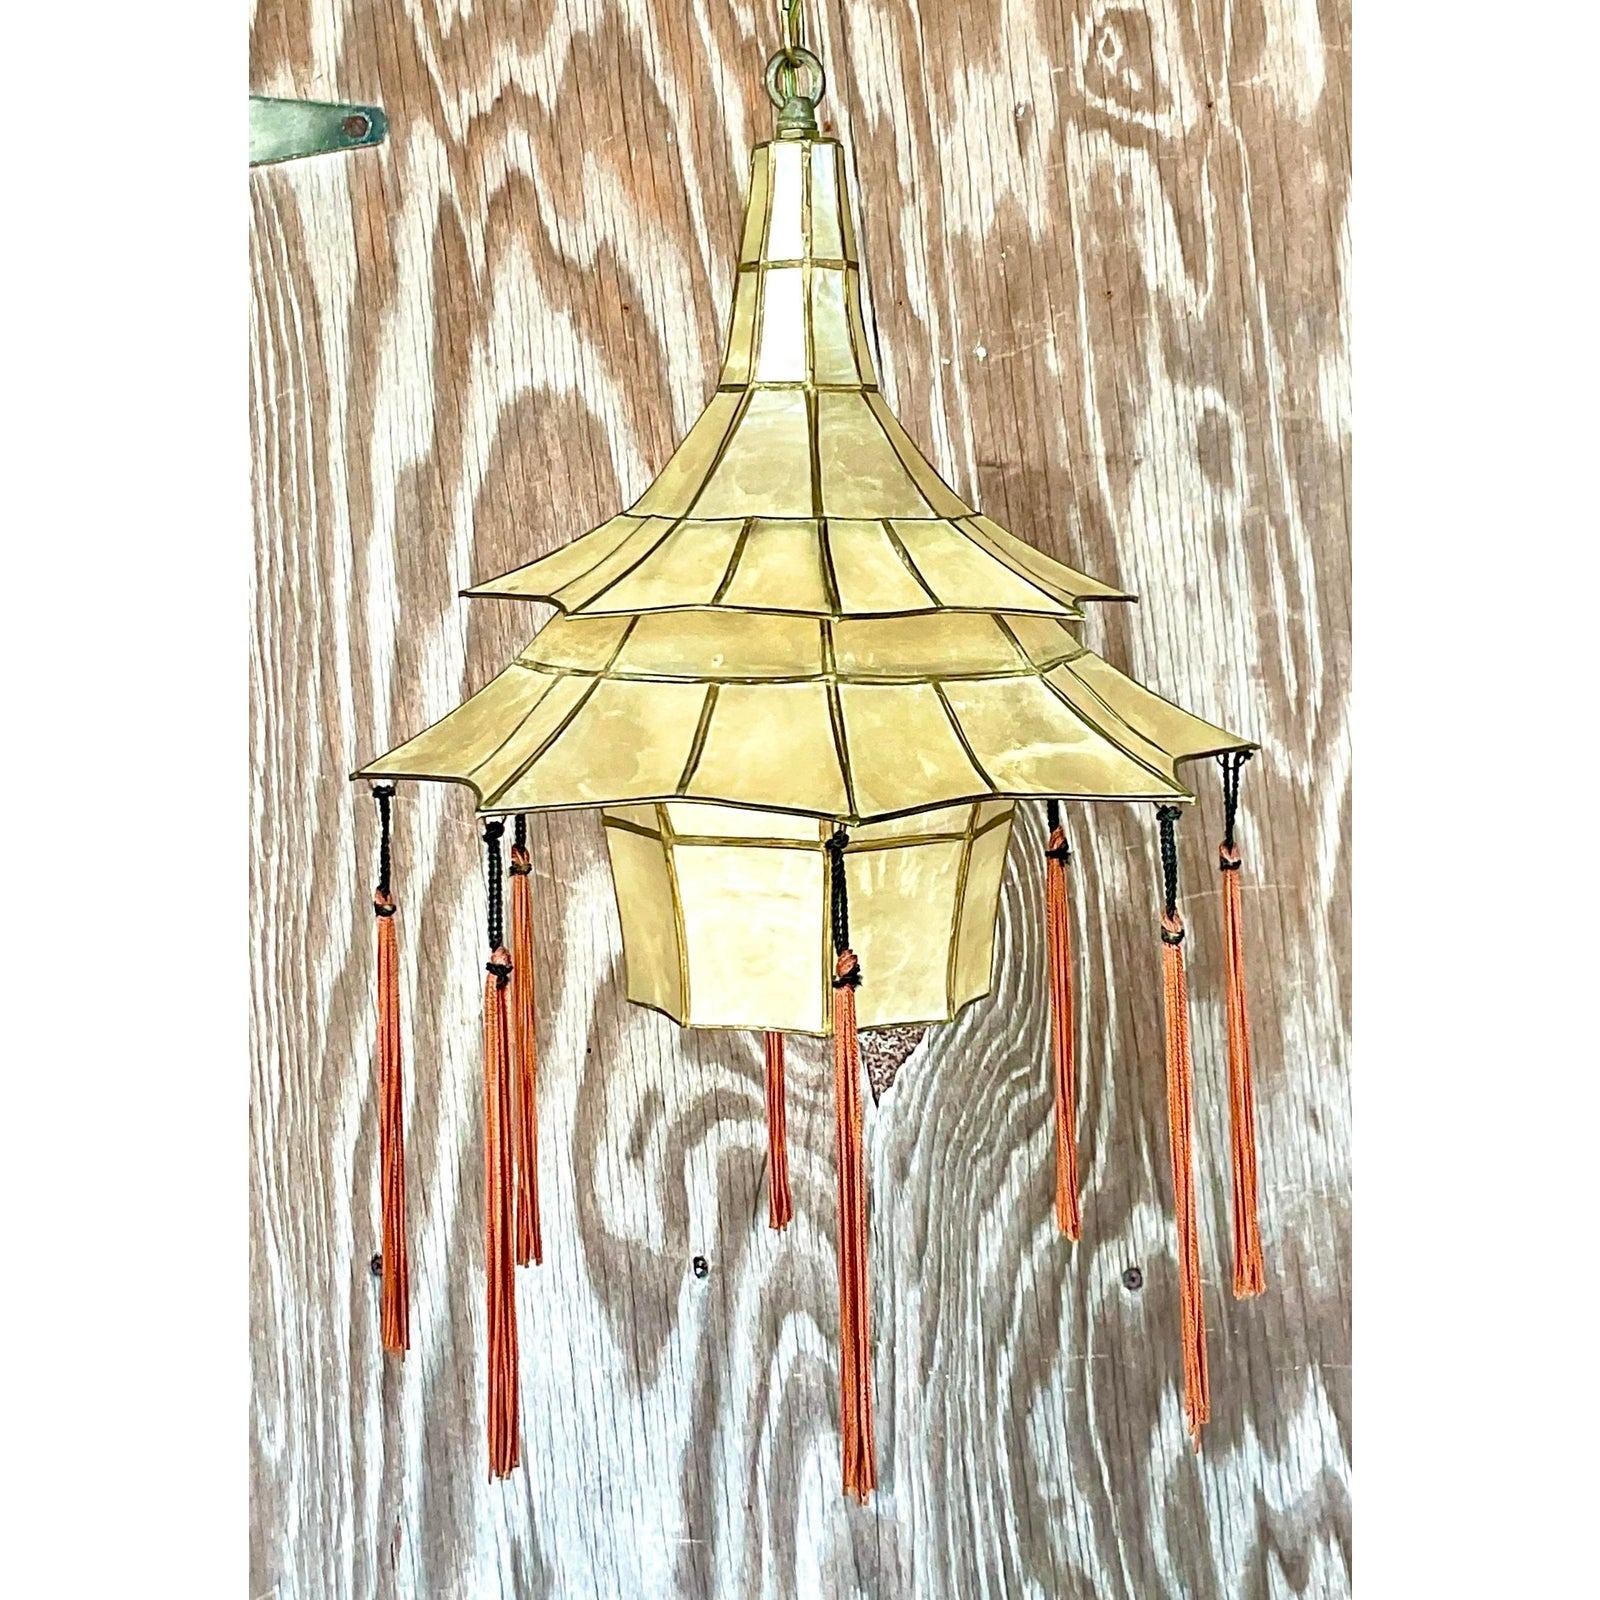 A spectacular vintage Boho chandelier. A beautiful Capiz shell construction in a chic Pagoda shape. Original hanging tassels. Acquired from a Palm Beach estate